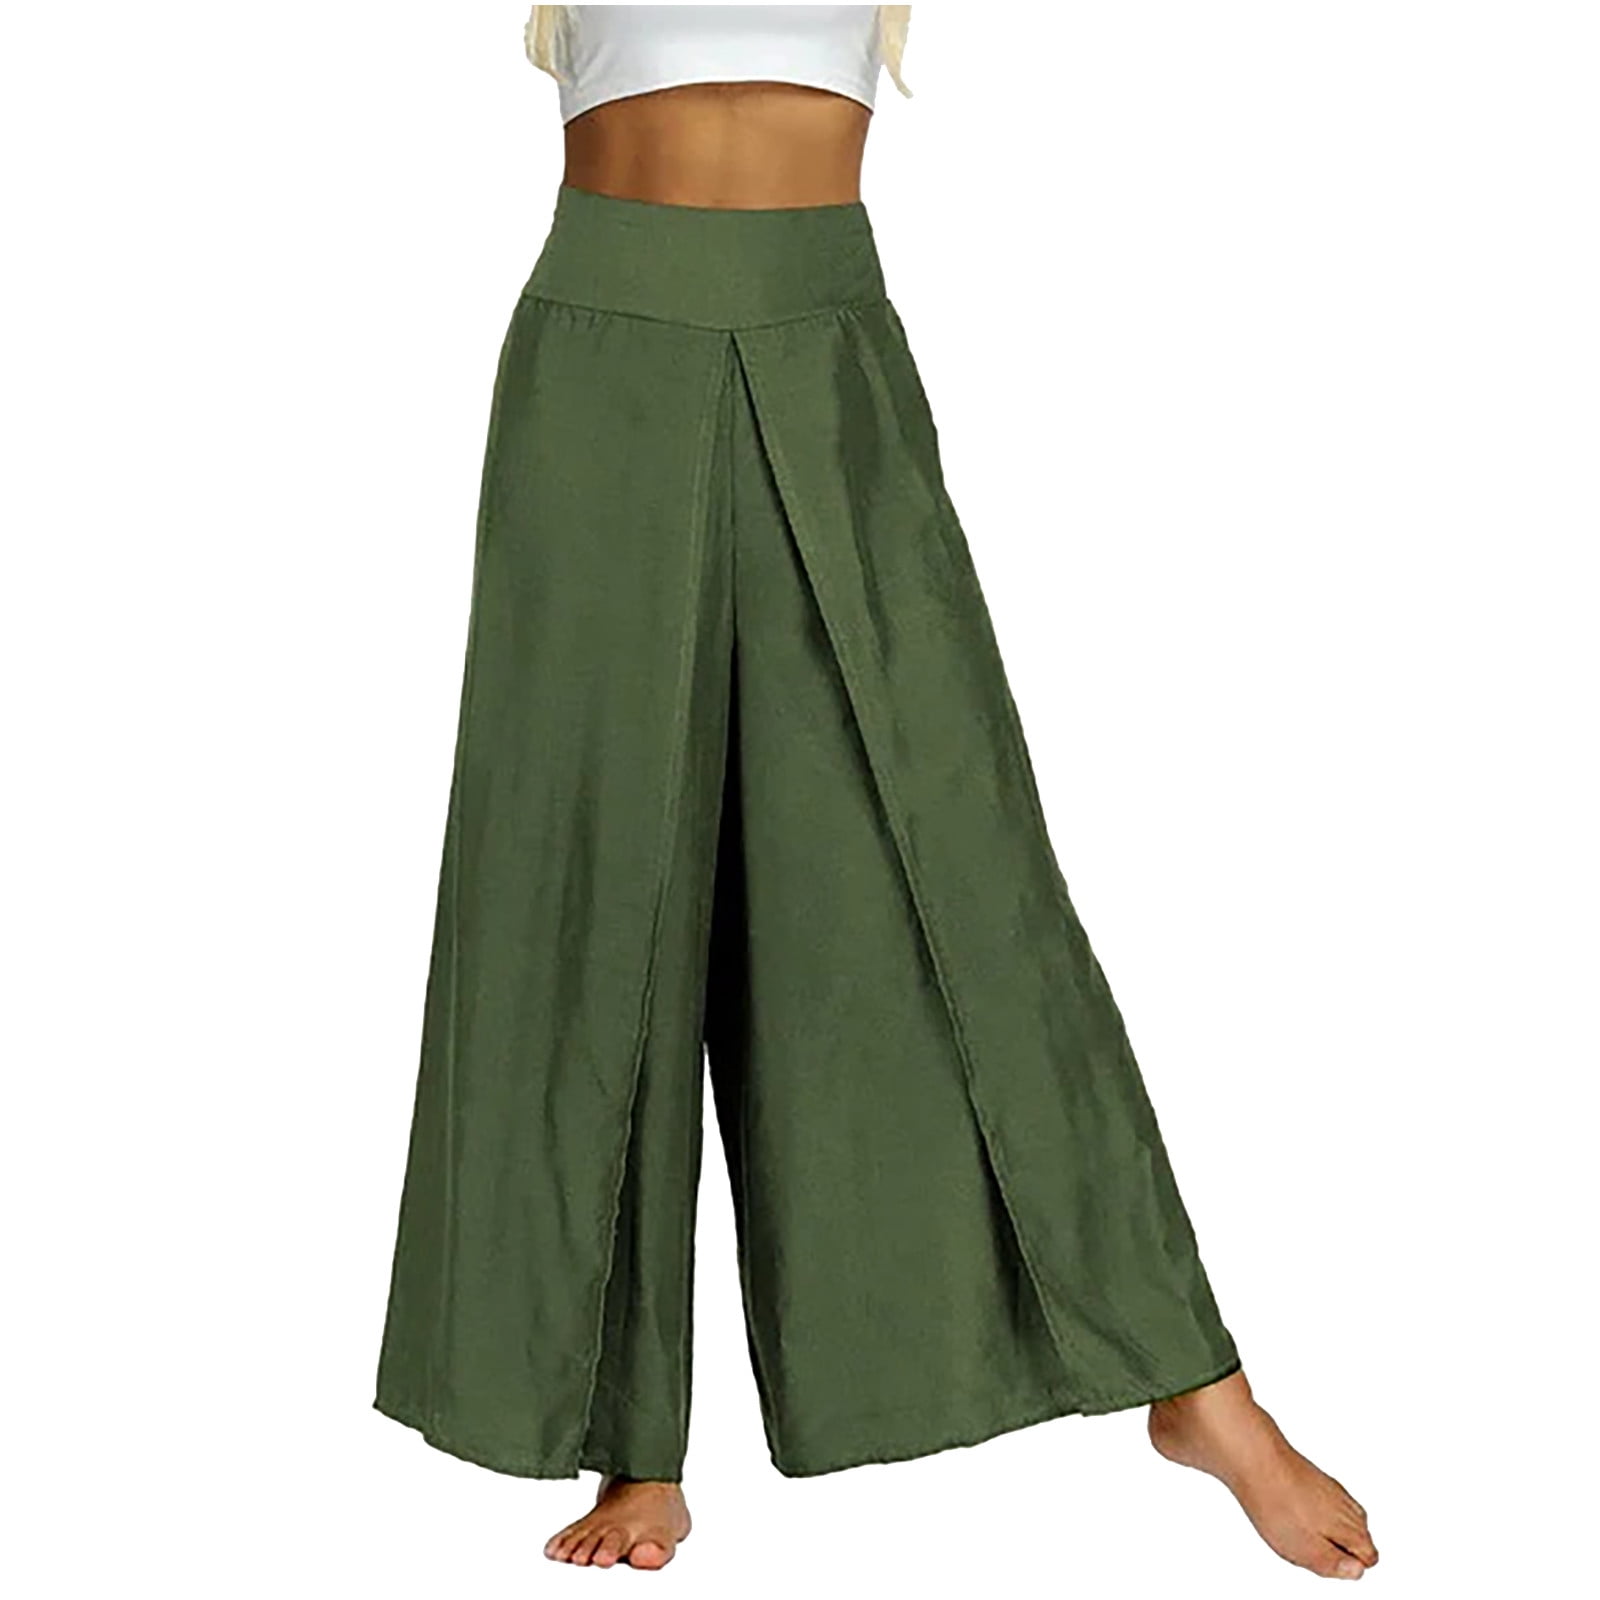 High Quality Cotton Mens Pants Casual Stretch Trousers In Long Straight  Style, Available In And Plus Sizes 42 46 CY6236 From Blessuillan, $26.75 |  DHgate.Com